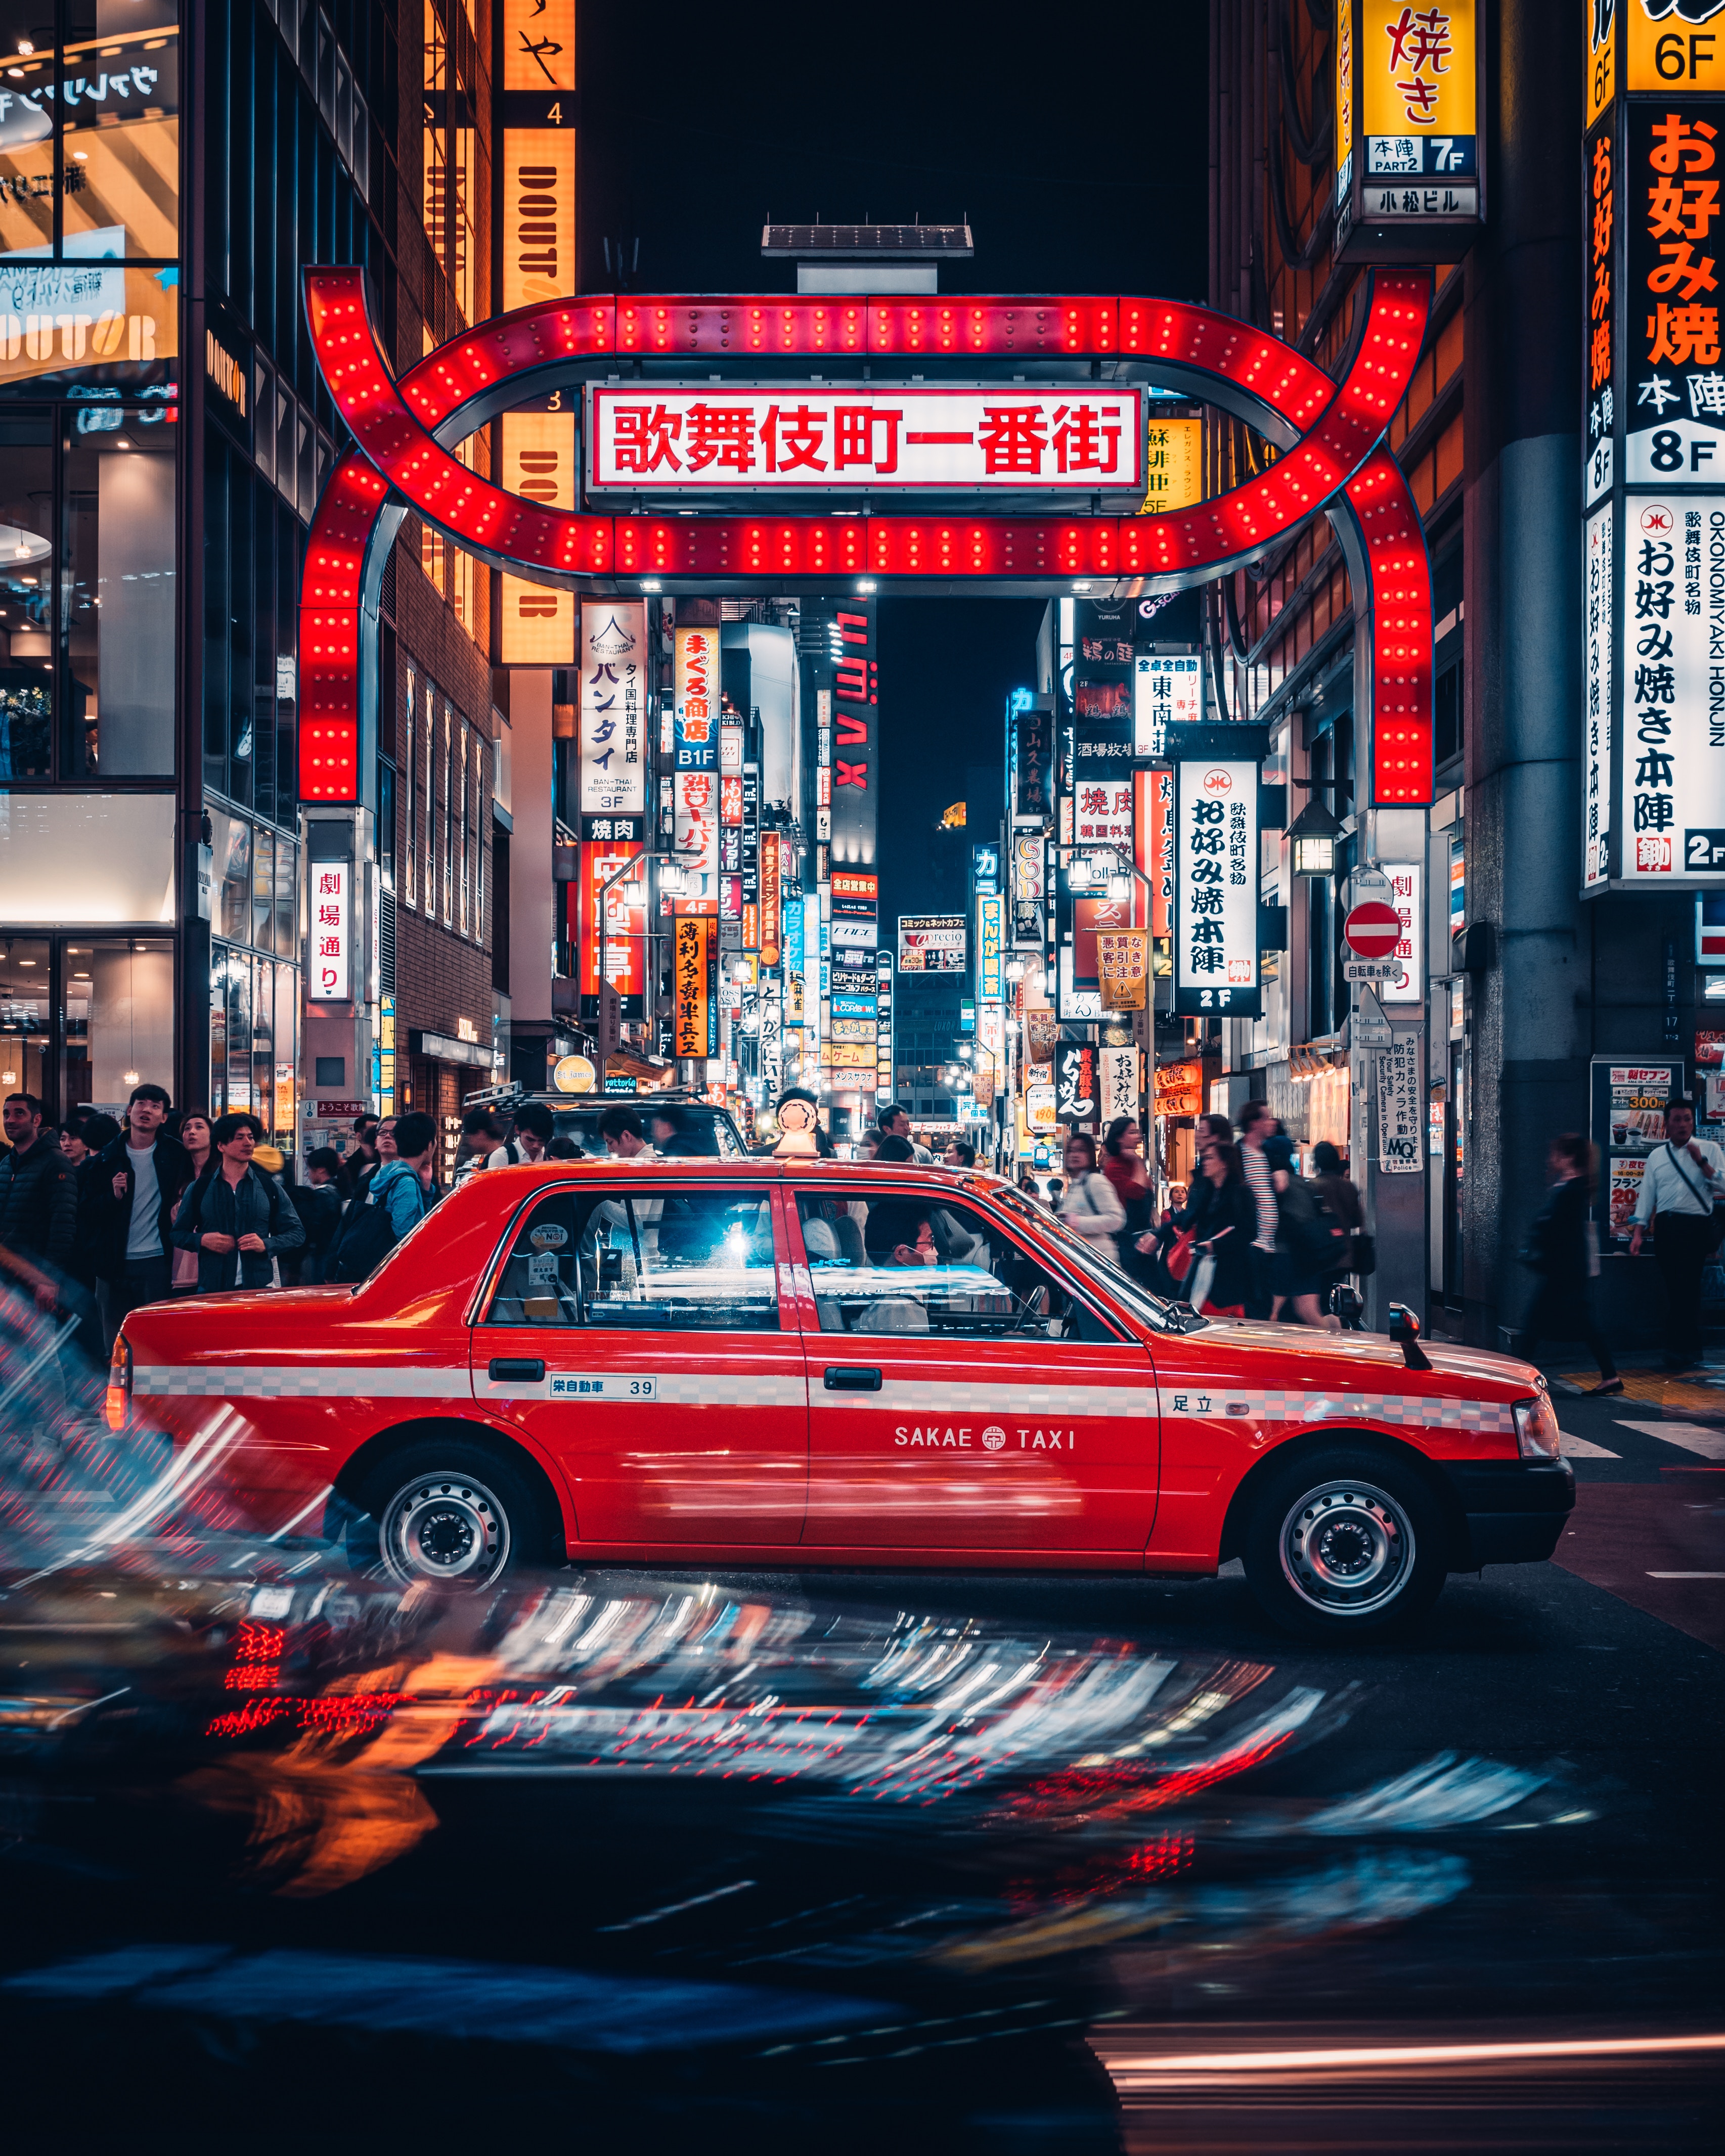 Simon Zhu Tokyo Urban Taxi Neon Cityscape Car Vehicle Red Cars People Asia 3411x4264